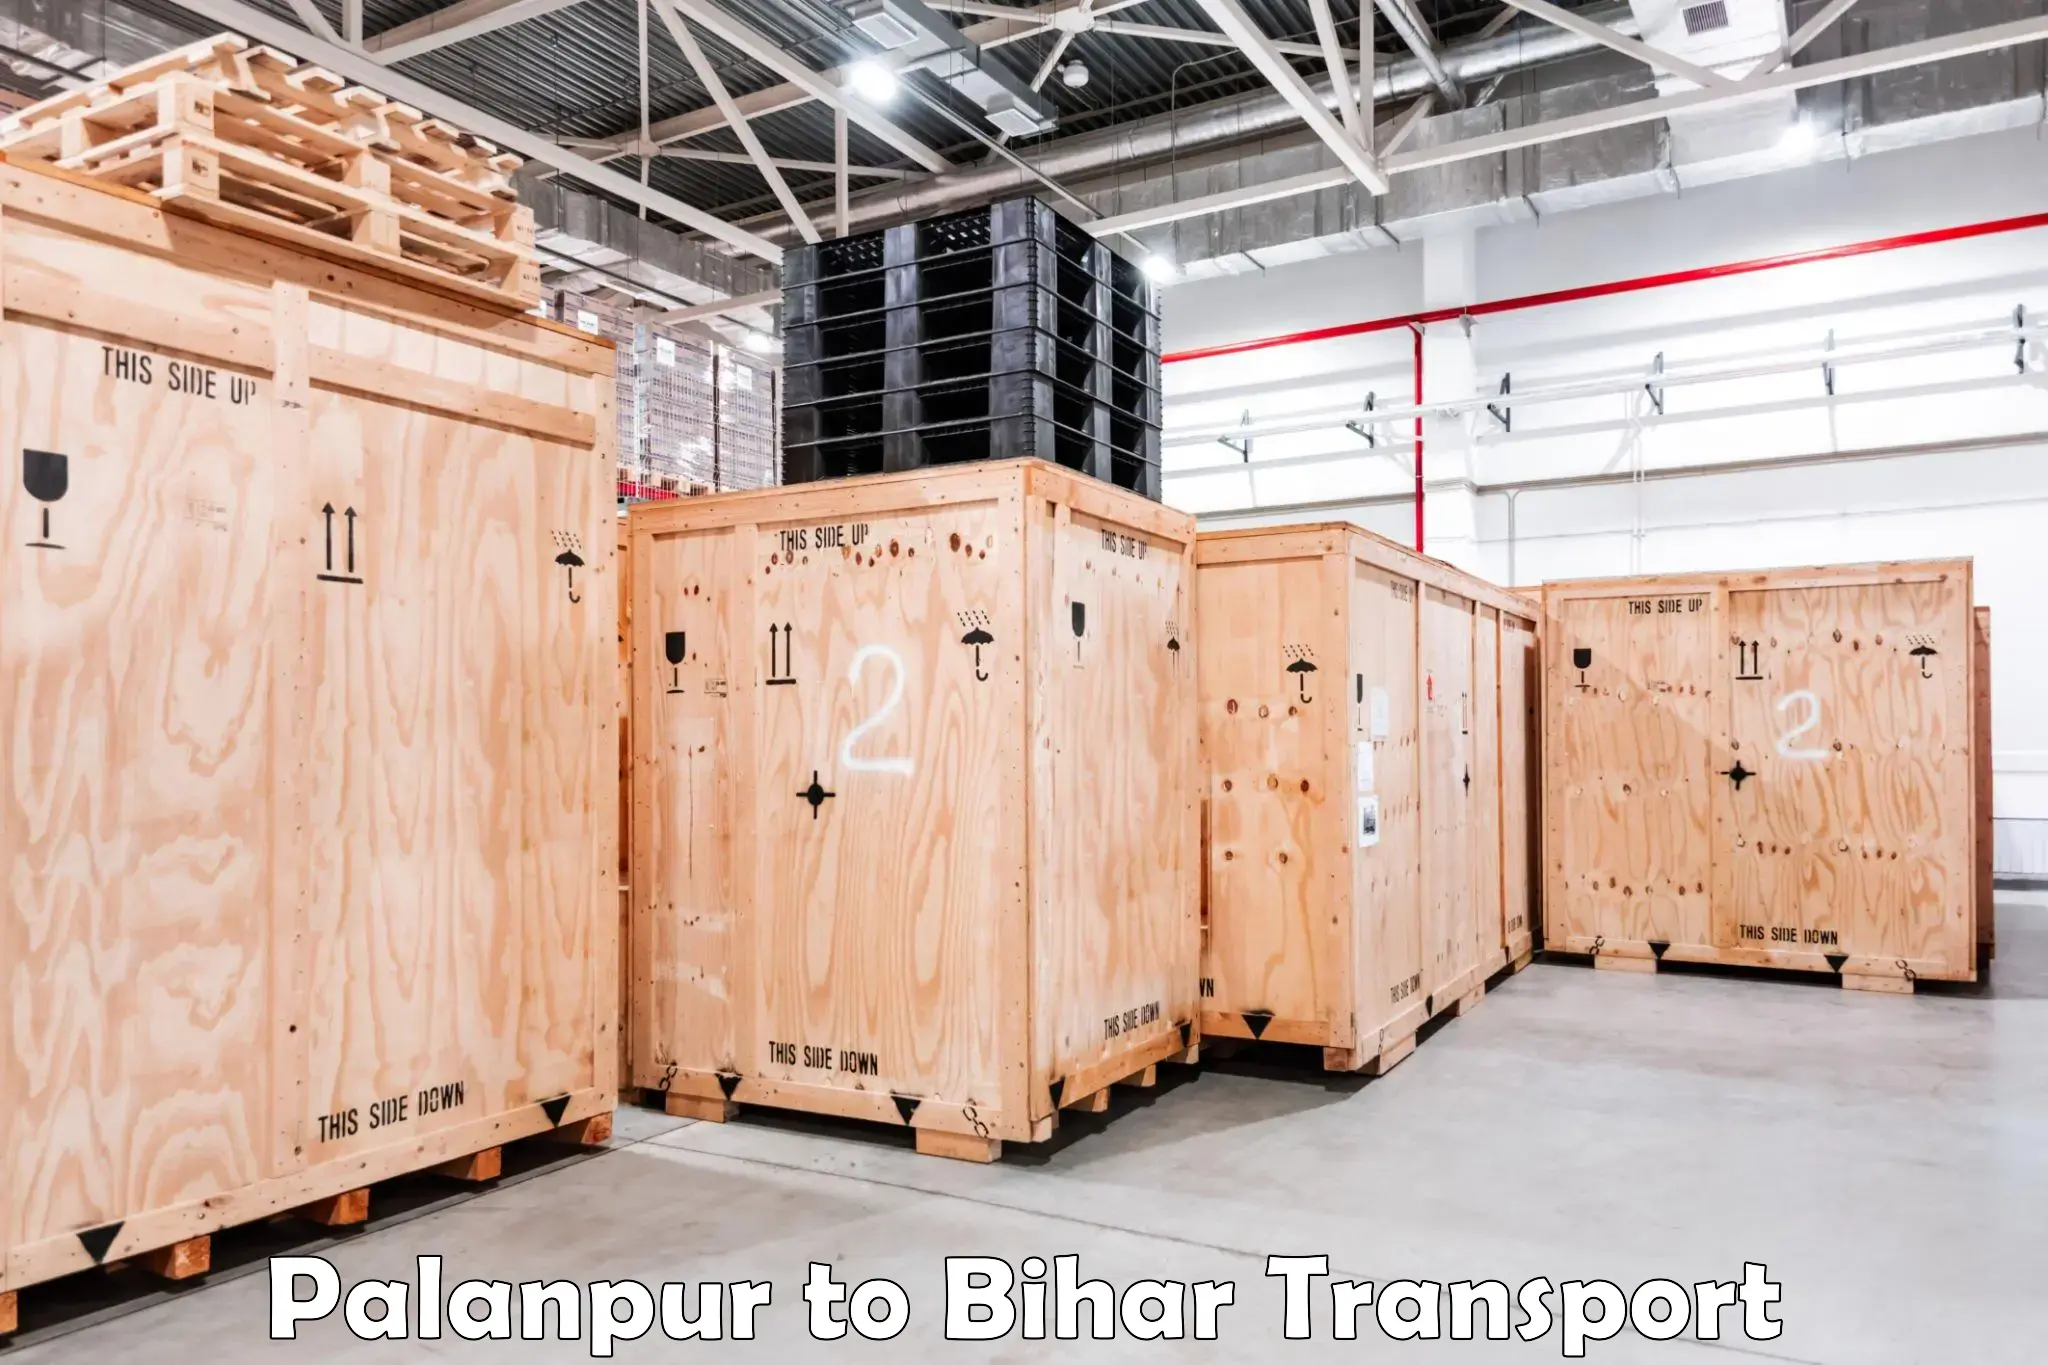 Daily parcel service transport Palanpur to Samastipur